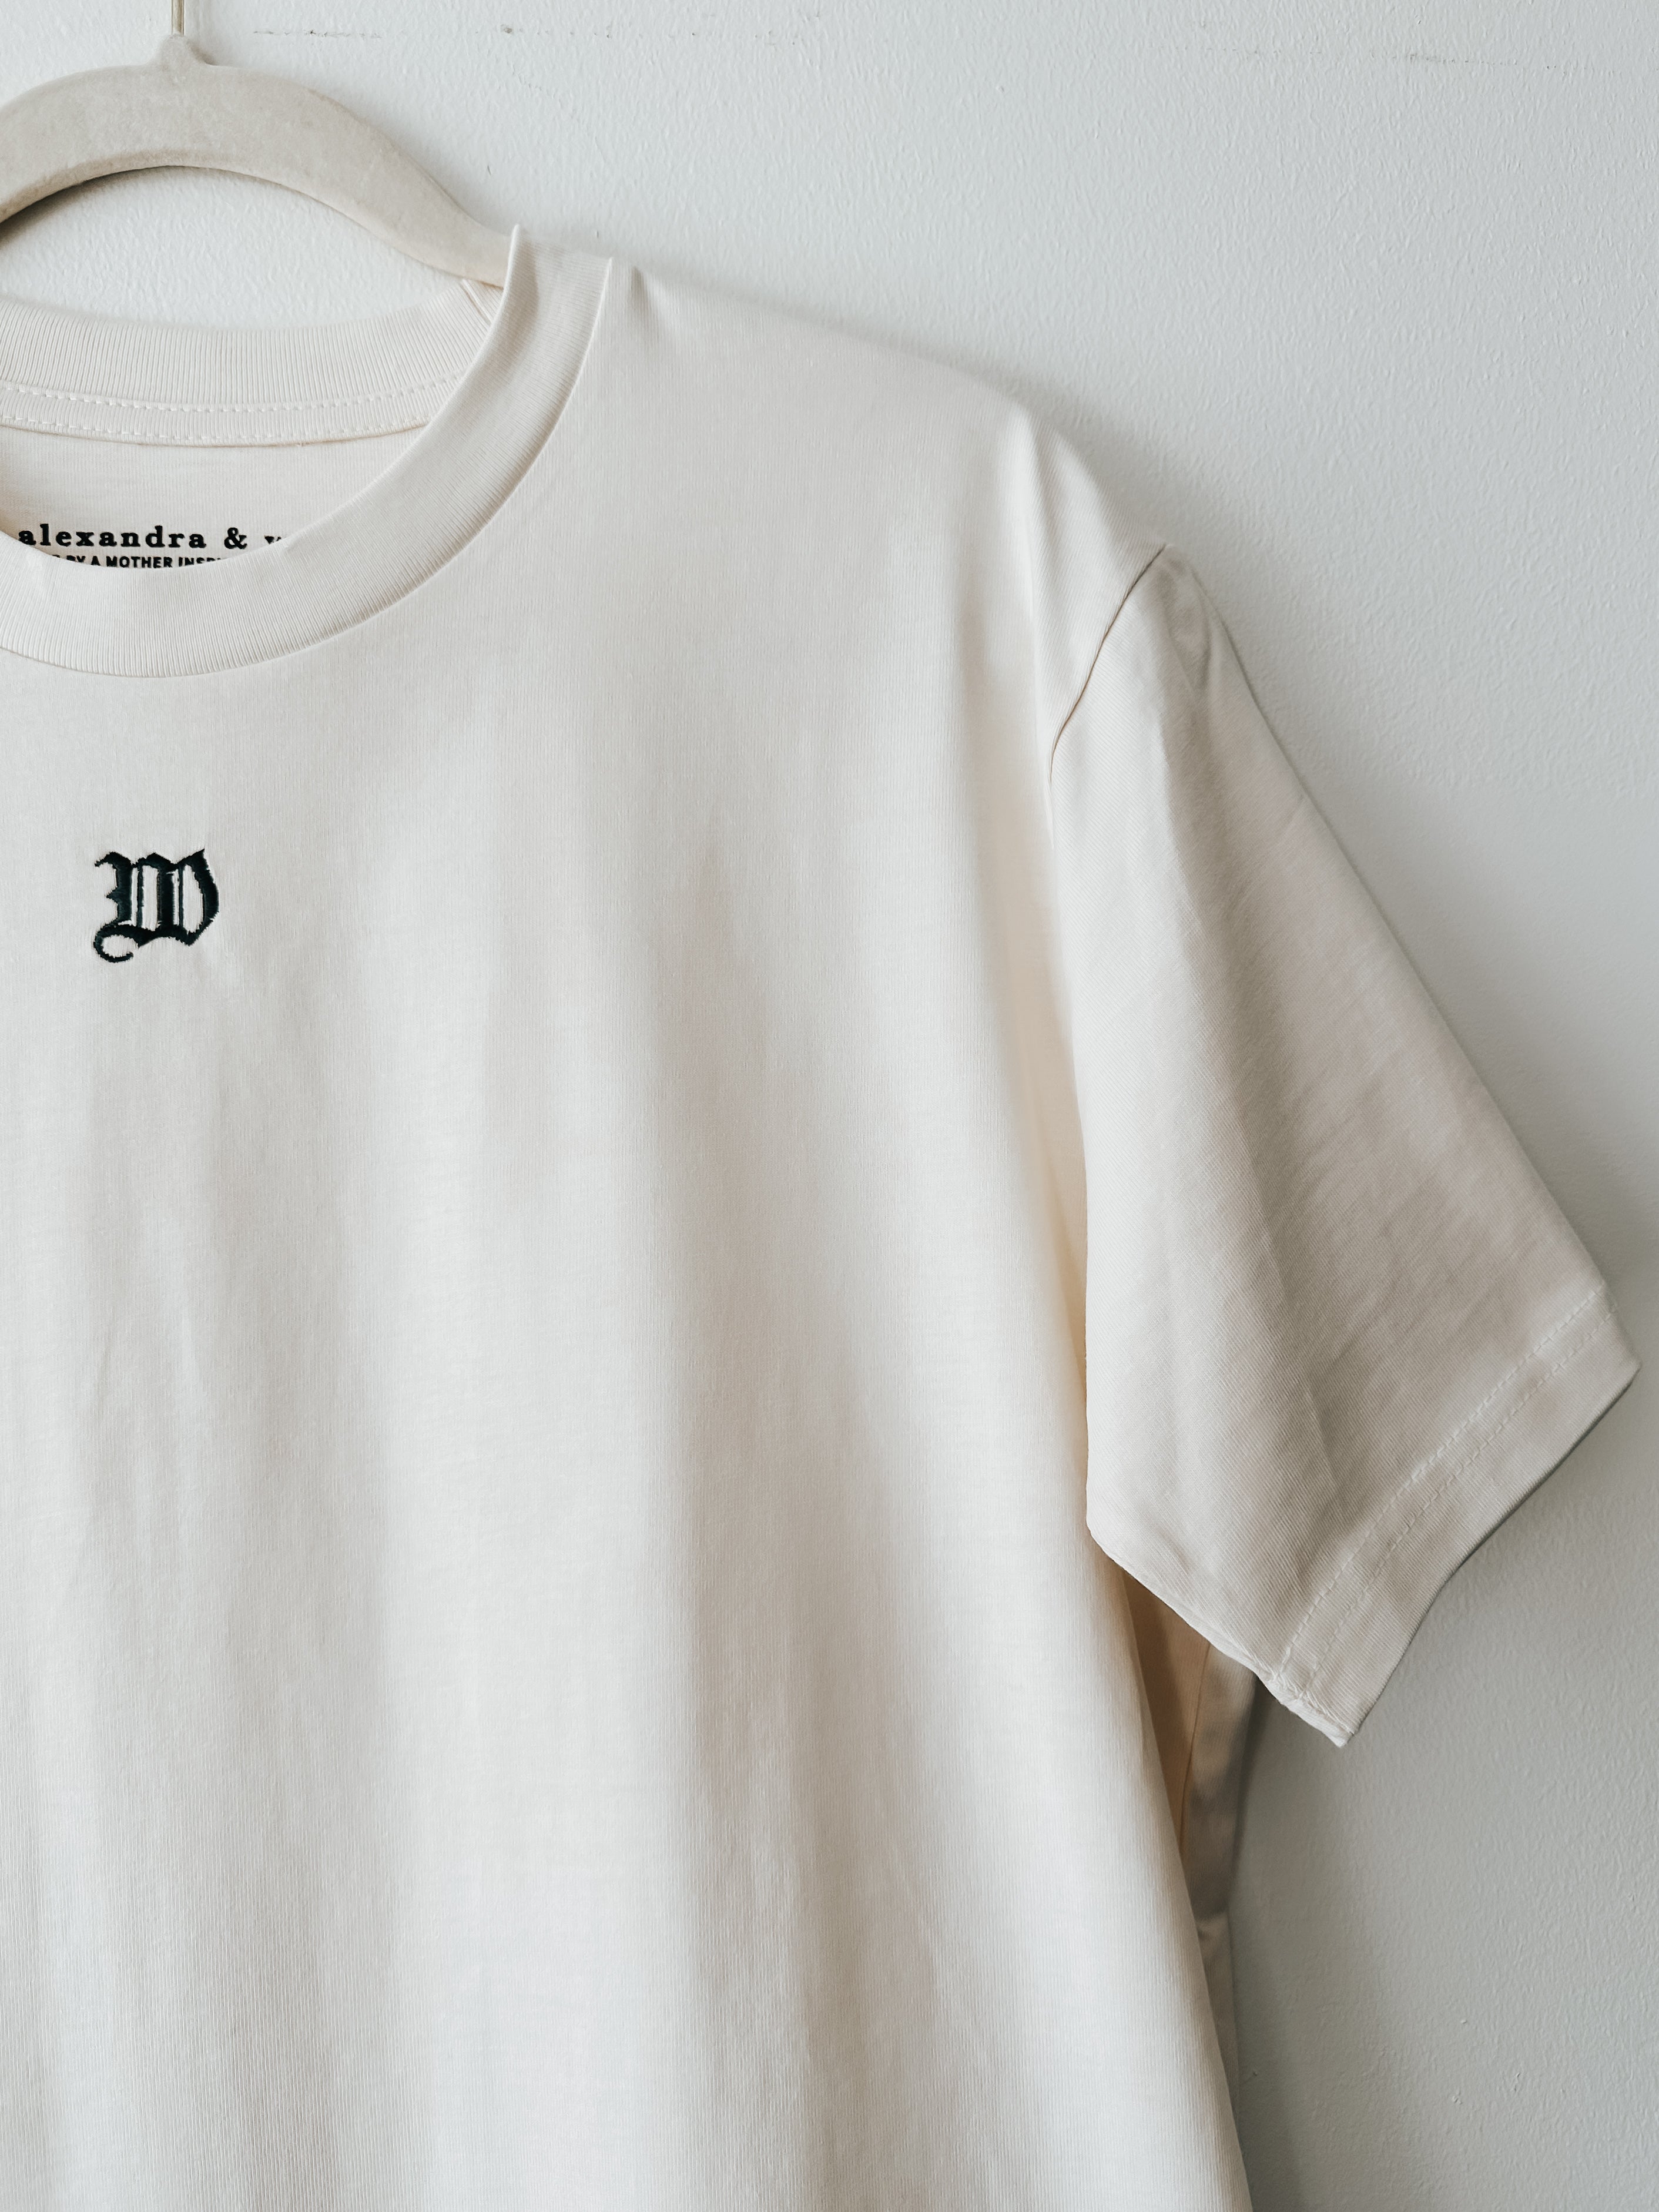 Classic Tee | Old English Letter